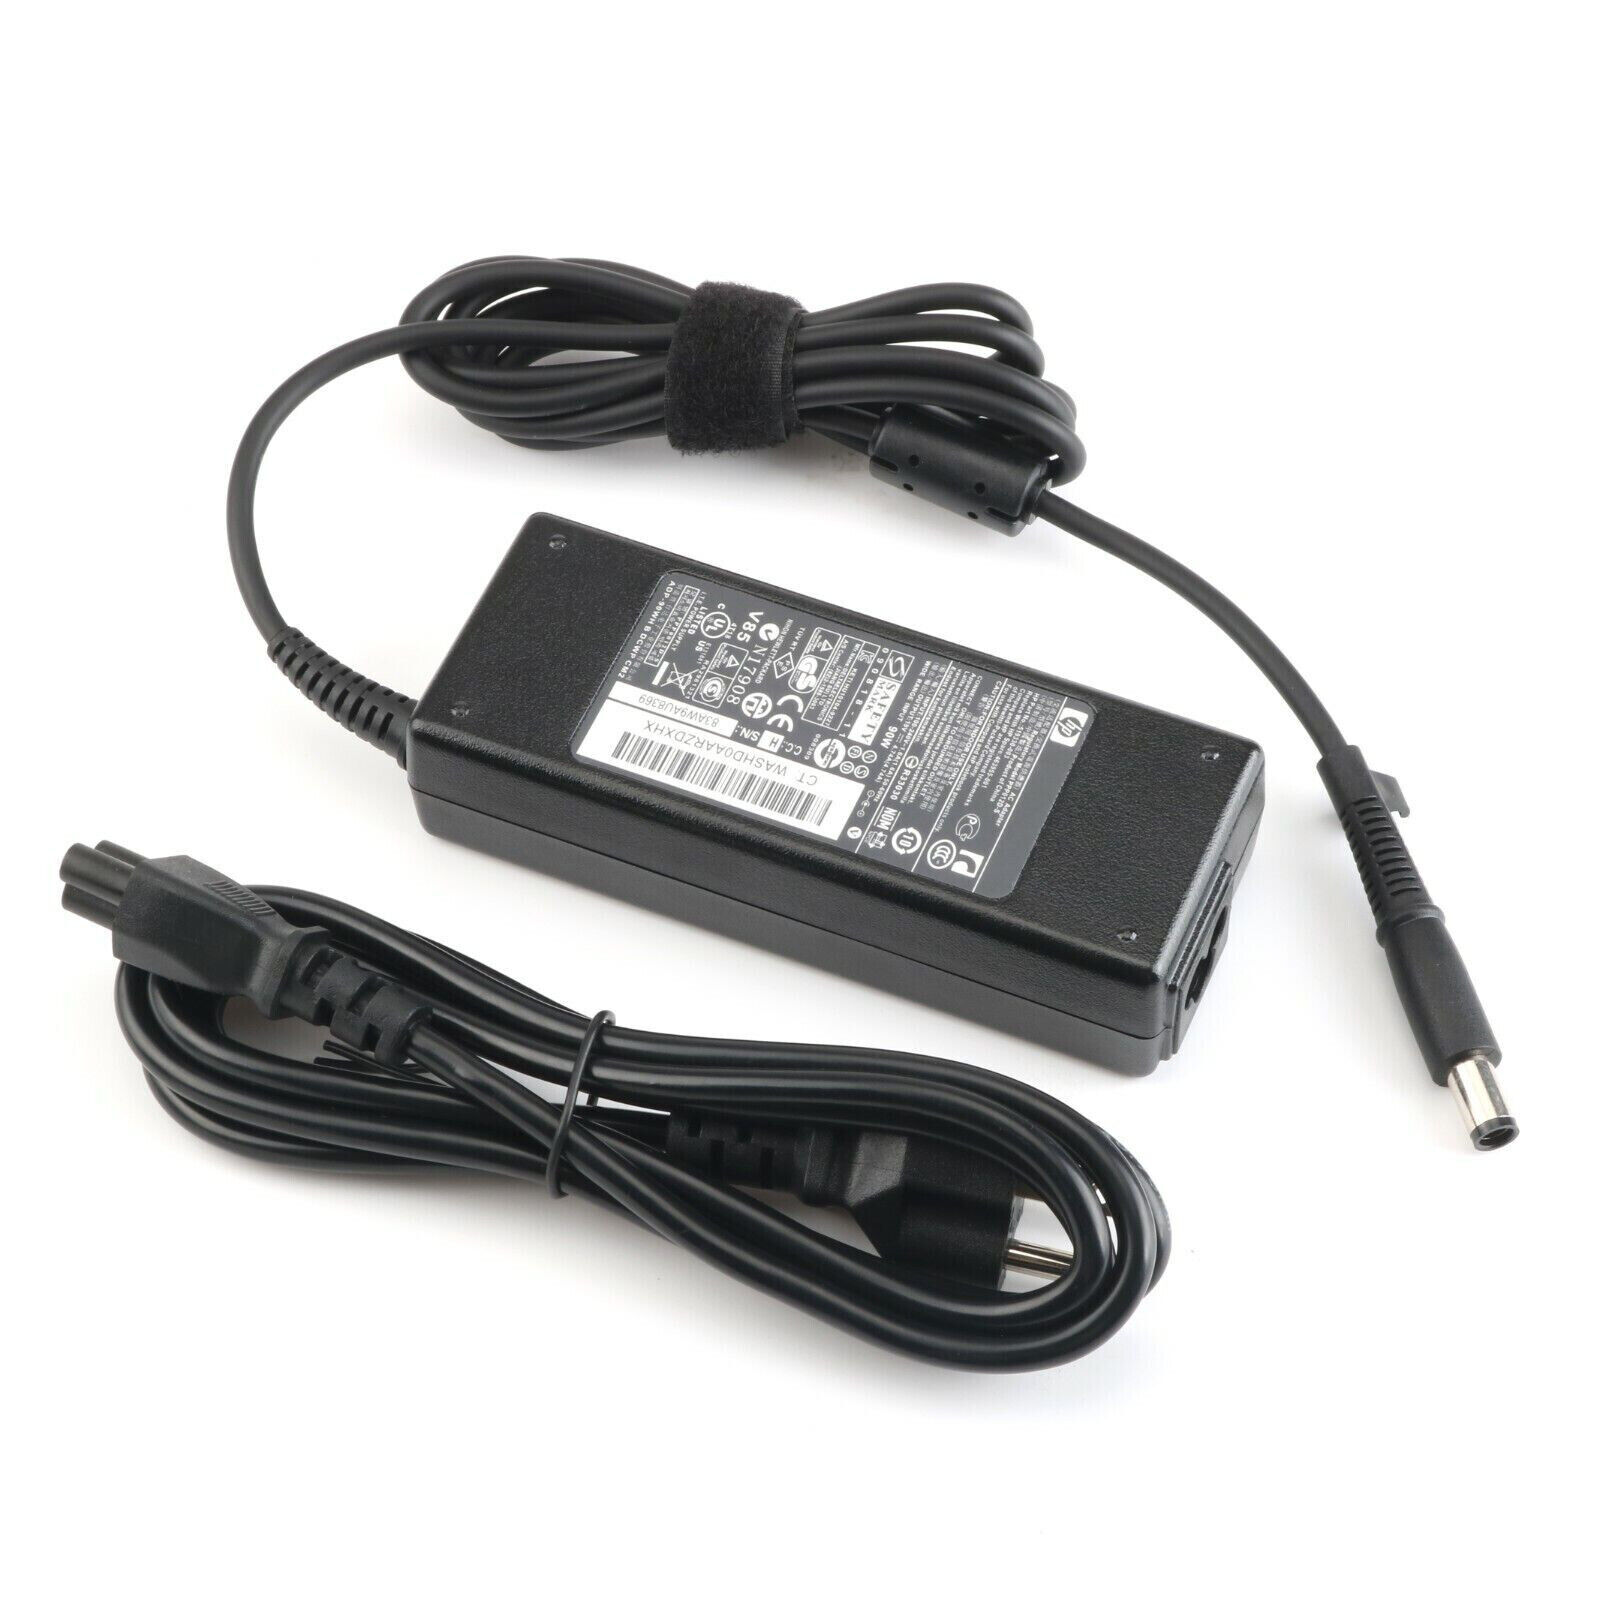 90W Genuine   Power Adapter Charger For HP Elitebook 8560w 8560p 8470p 8470w US